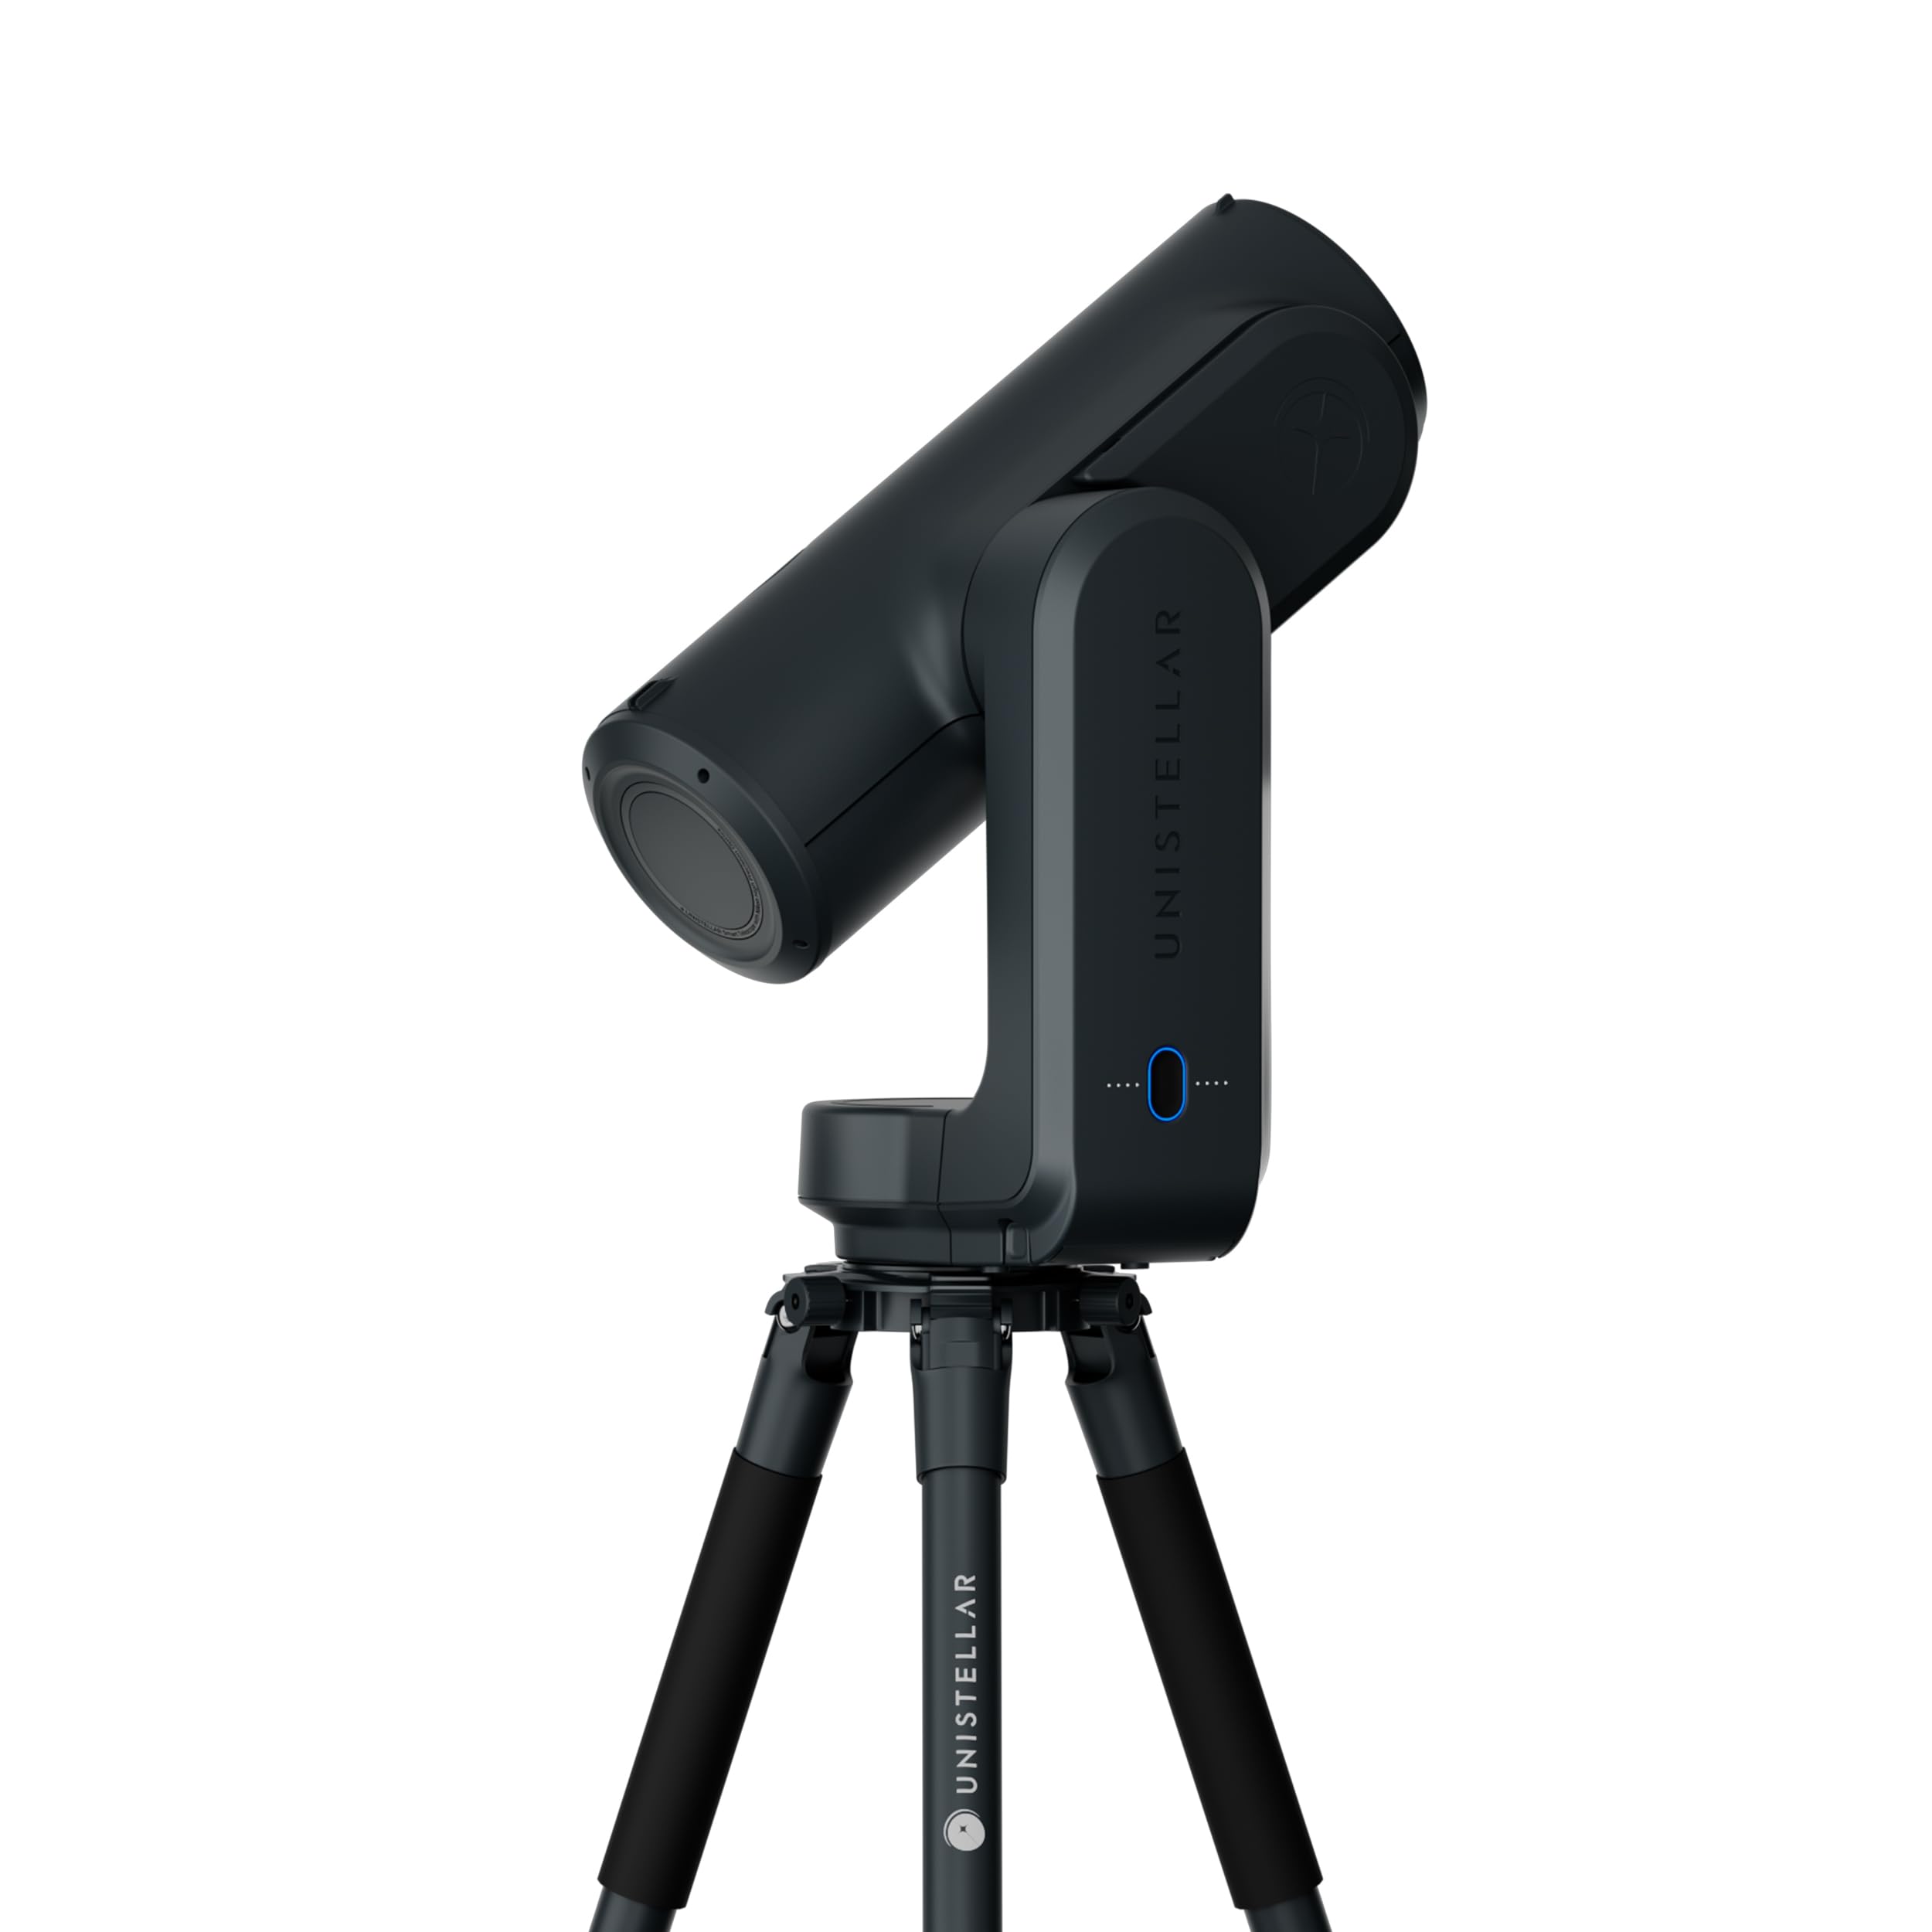 UNISTELLAR Odyssey PRO - Smart Digital Telescope - Beginners and Experienced Users - iPhone and Android Compatible - Autofocus - Nikon Eyepiece Technology